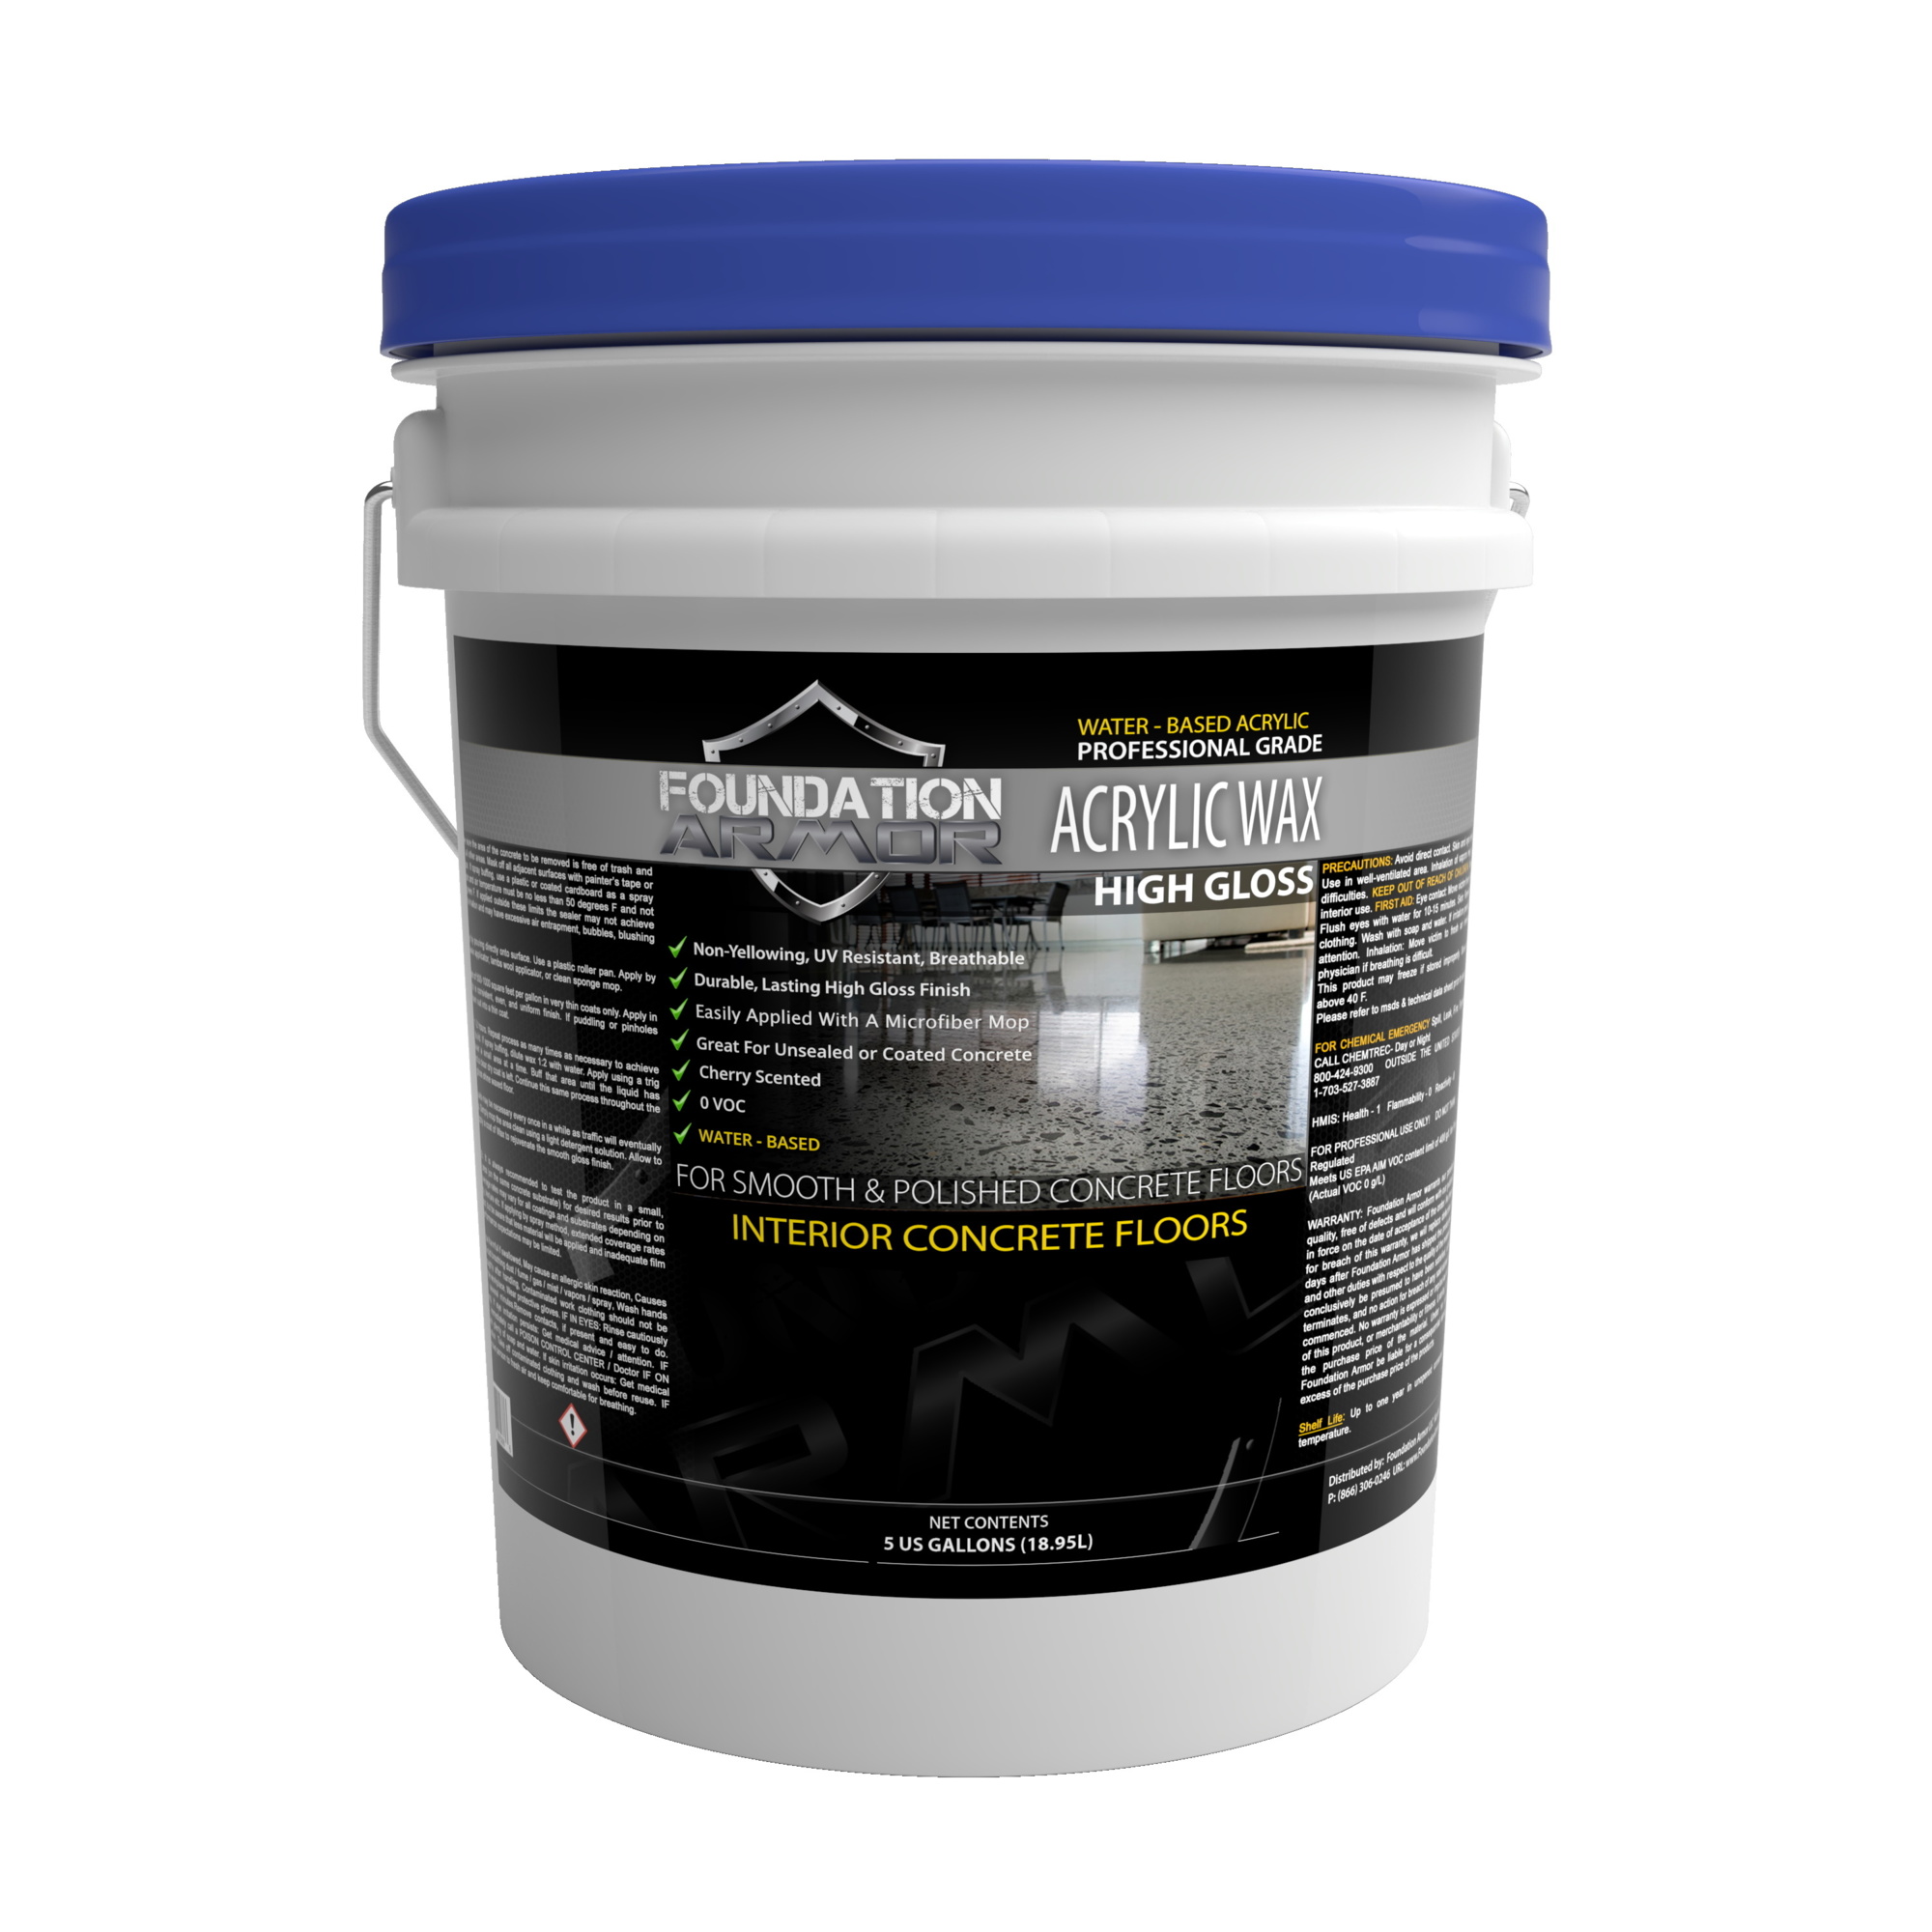 Foundation Armor, High Gloss Concrete Floor Wax, Container Size 5 Gallon, Color Clear, Application Method Microfiber Mop, Model WAXGLOSS5GAL